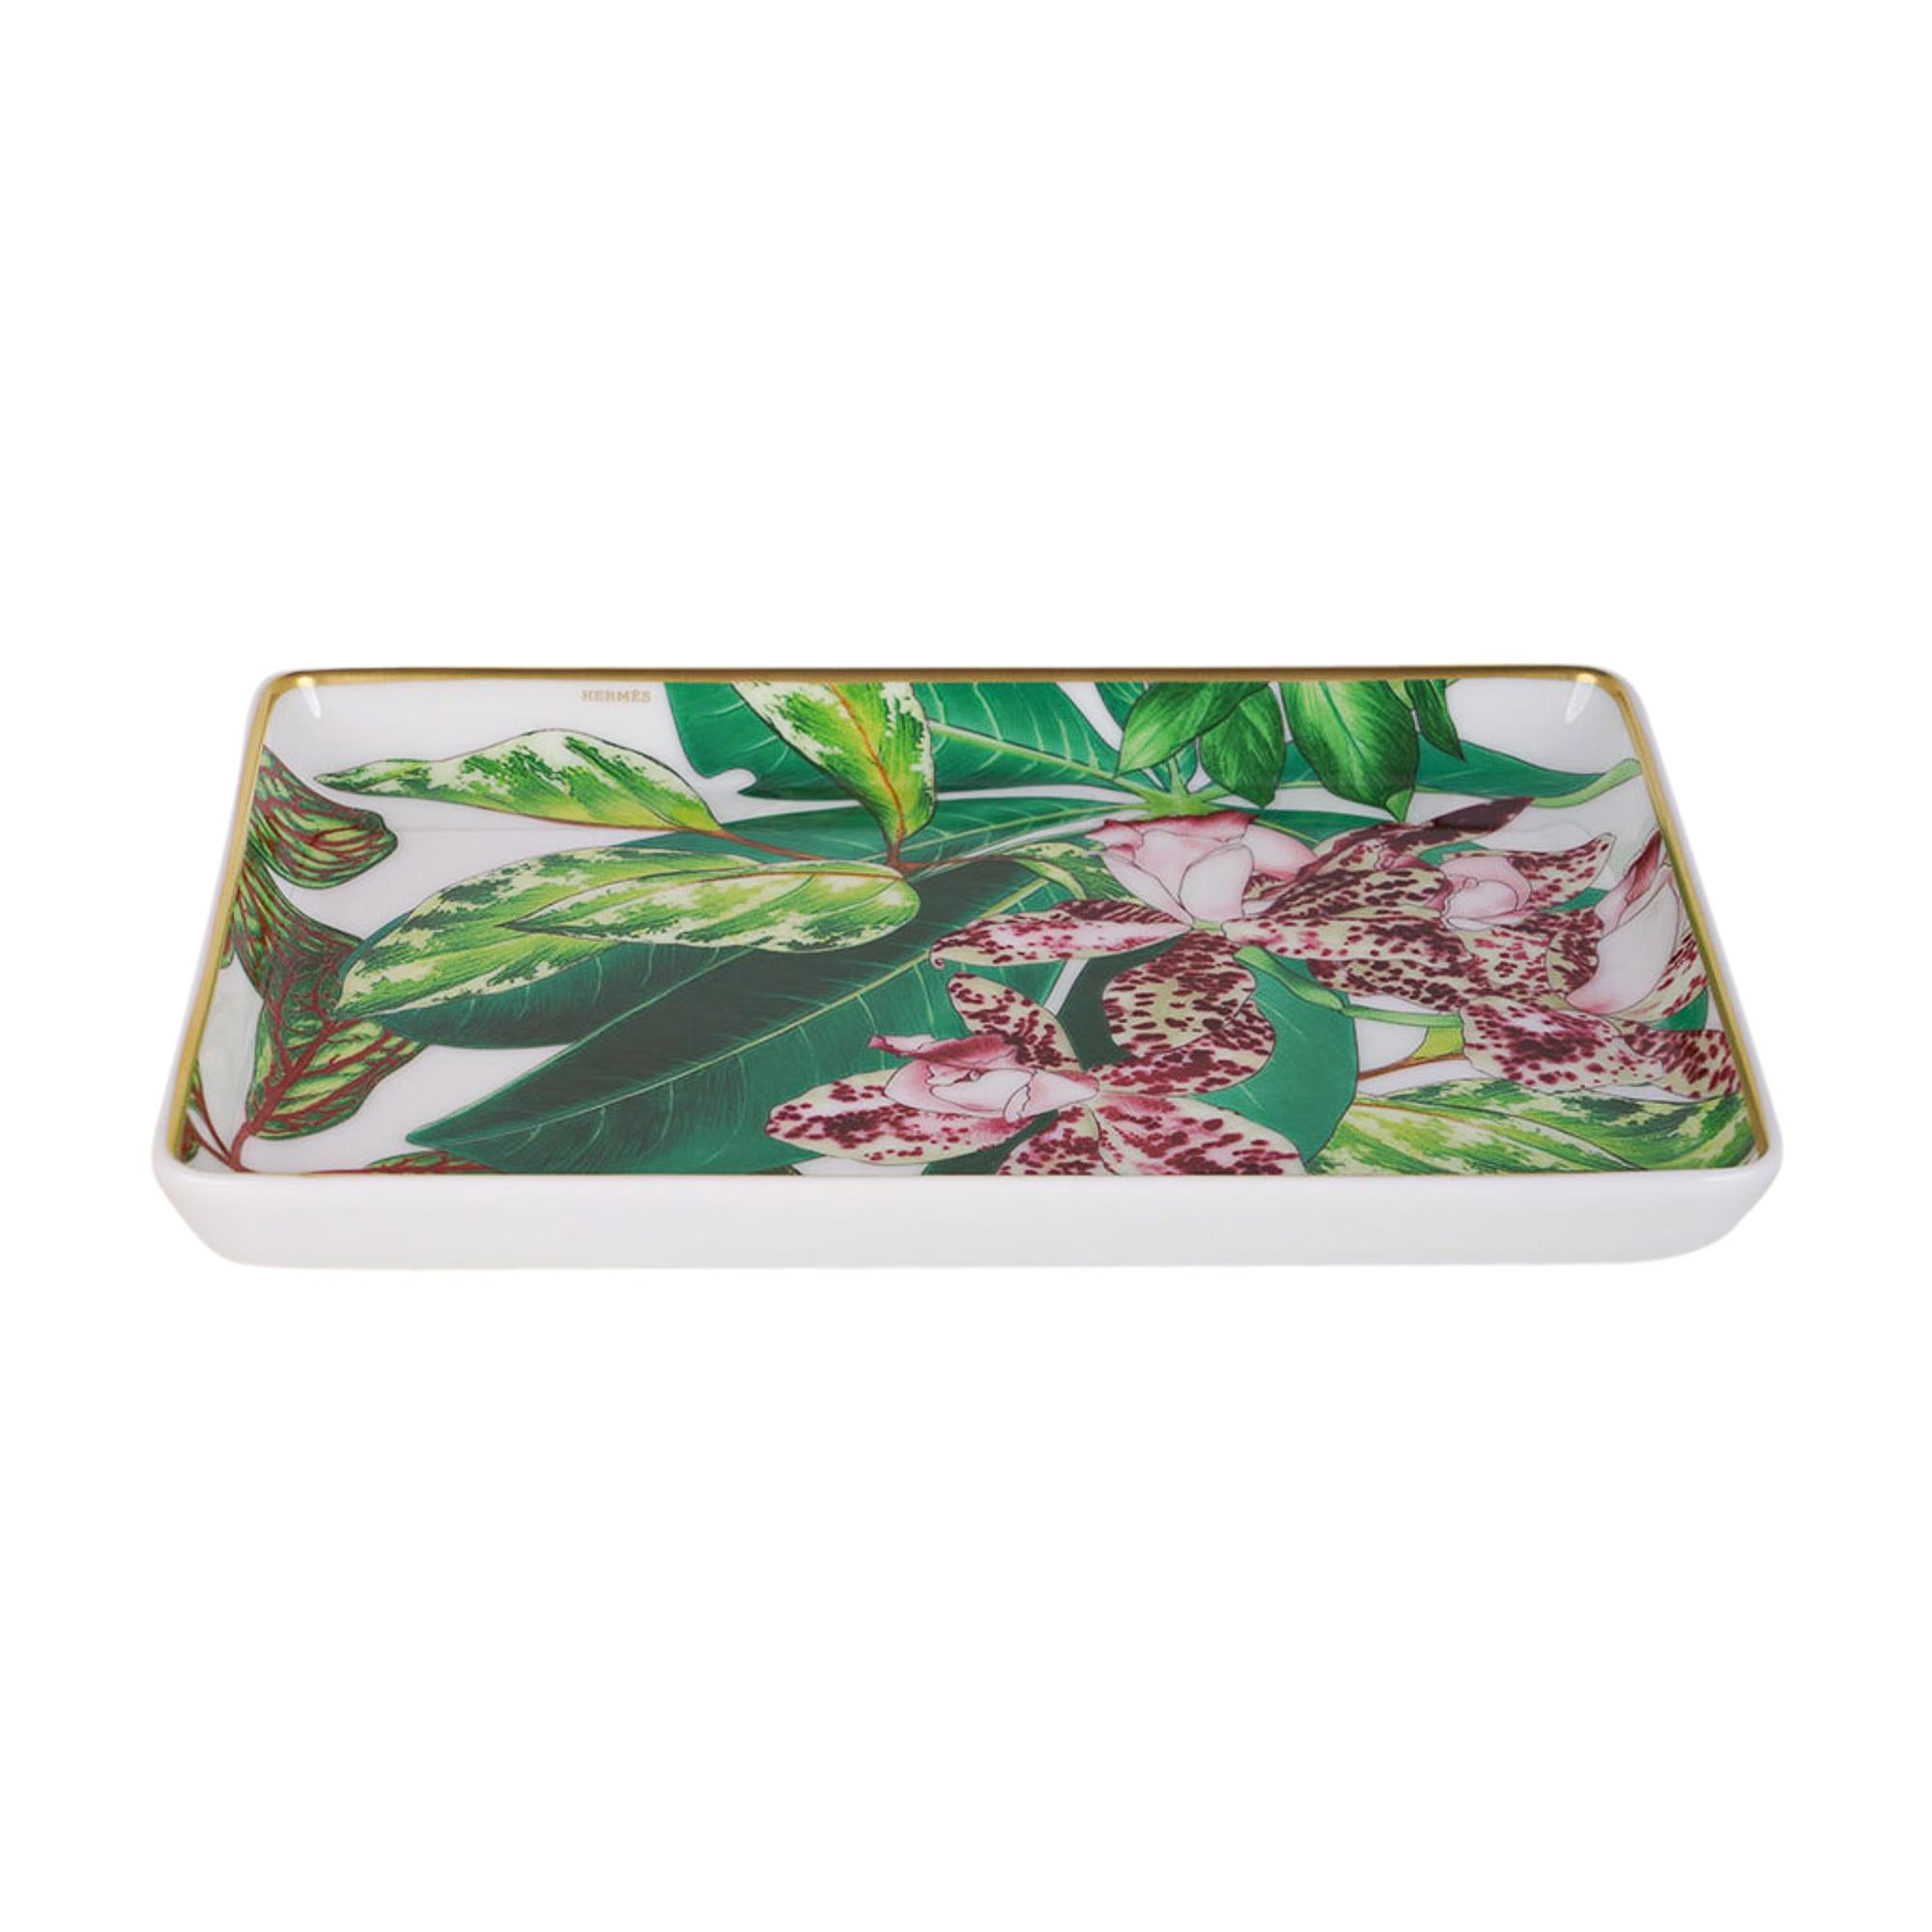 Hermes Passifolia Small Tray no 1 / Sushi Plate New w/Box For Sale 3